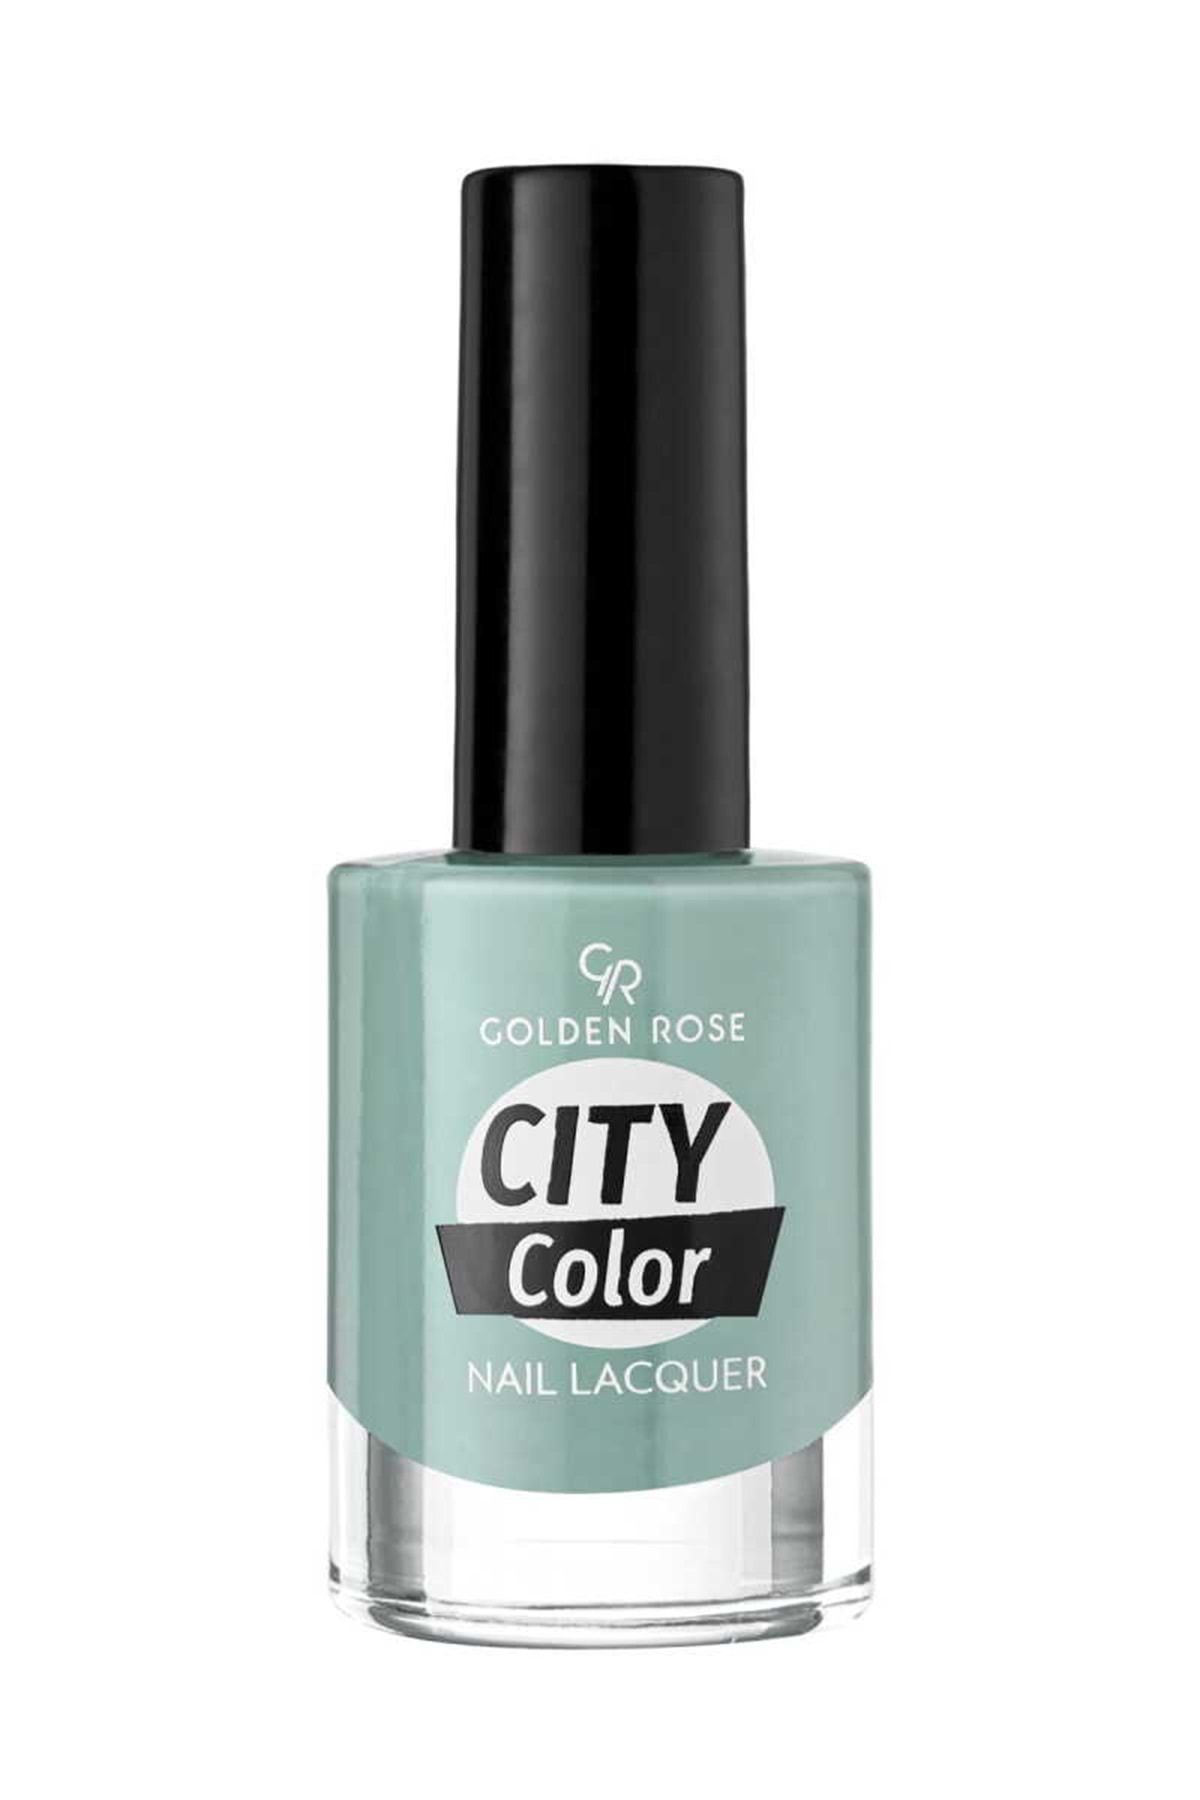 Golden Rose City Color Nail Lacquer Oje 86